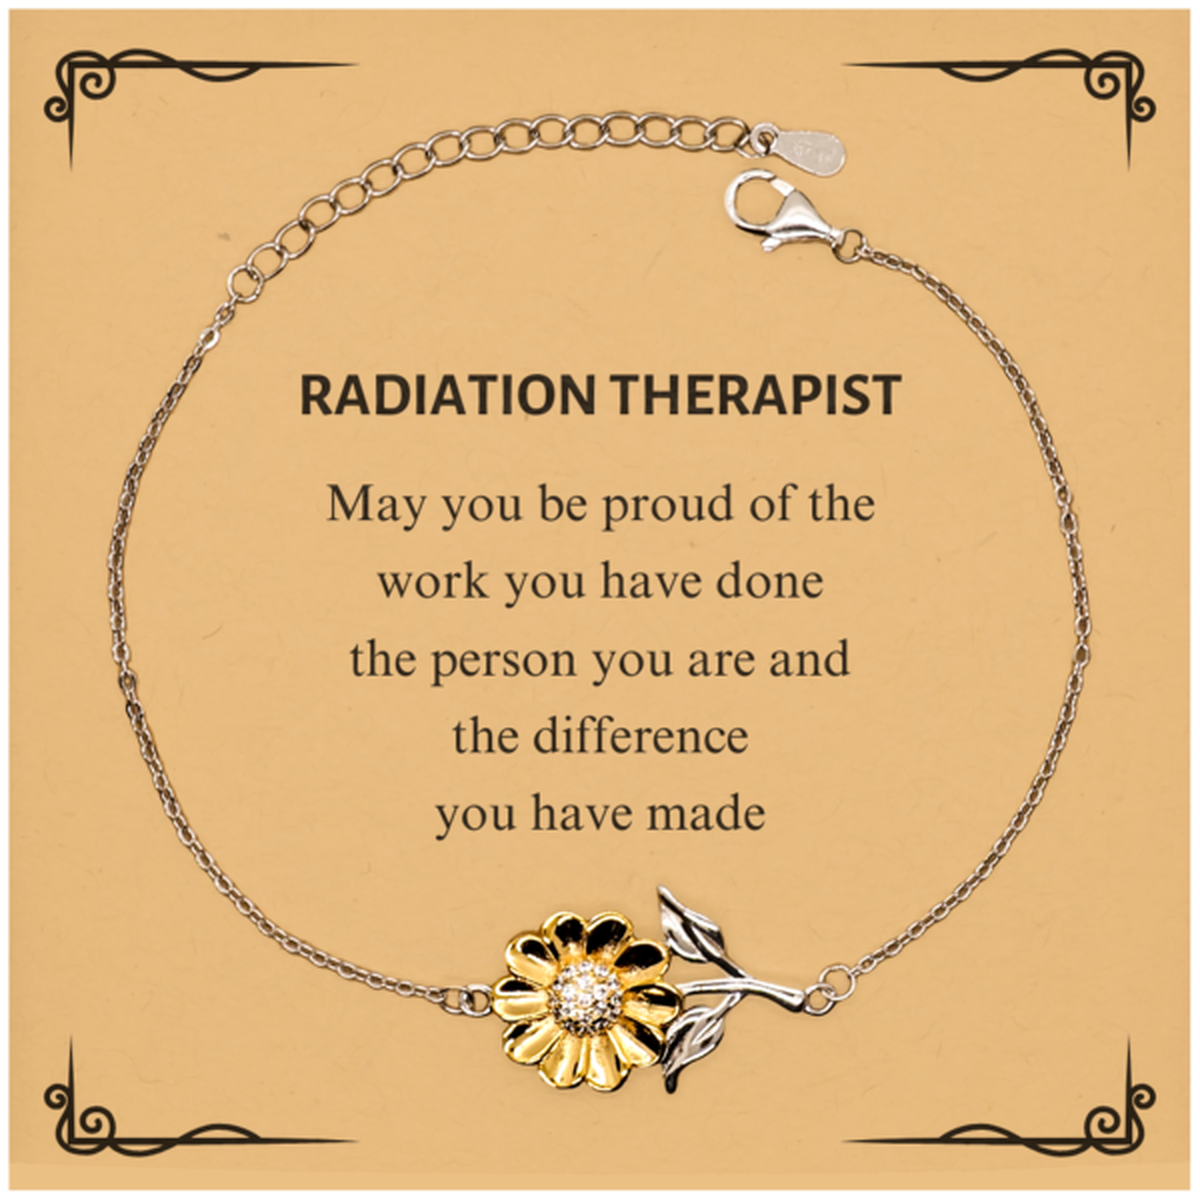 Radiation Therapist May you be proud of the work you have done, Retirement Radiation Therapist Sunflower Bracelet for Colleague Appreciation Gifts Amazing for Radiation Therapist